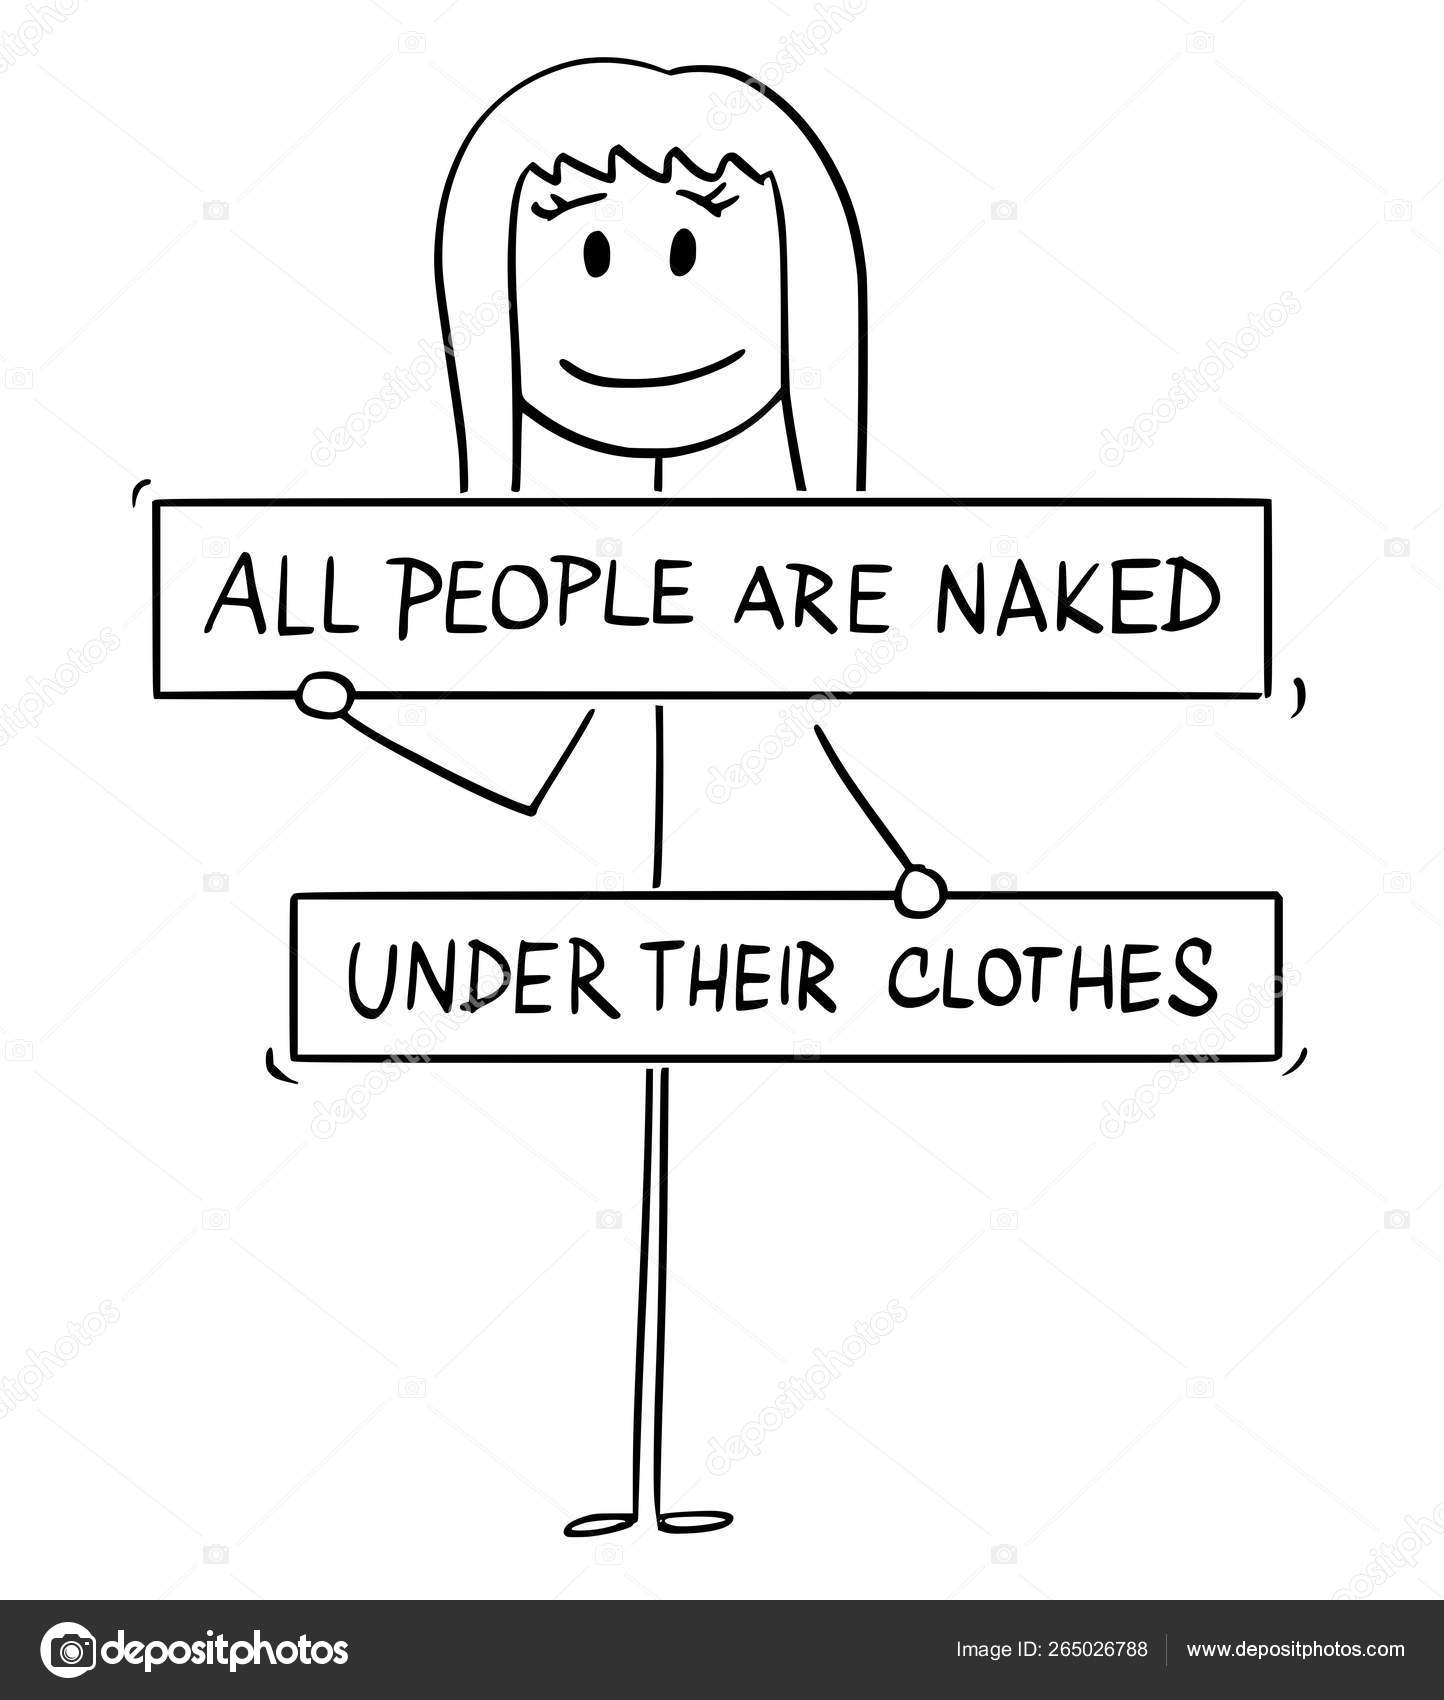 Cartoon Of Nude Woman With Breasts Groin Crotch Or Genitals Covered By All People Are Naked